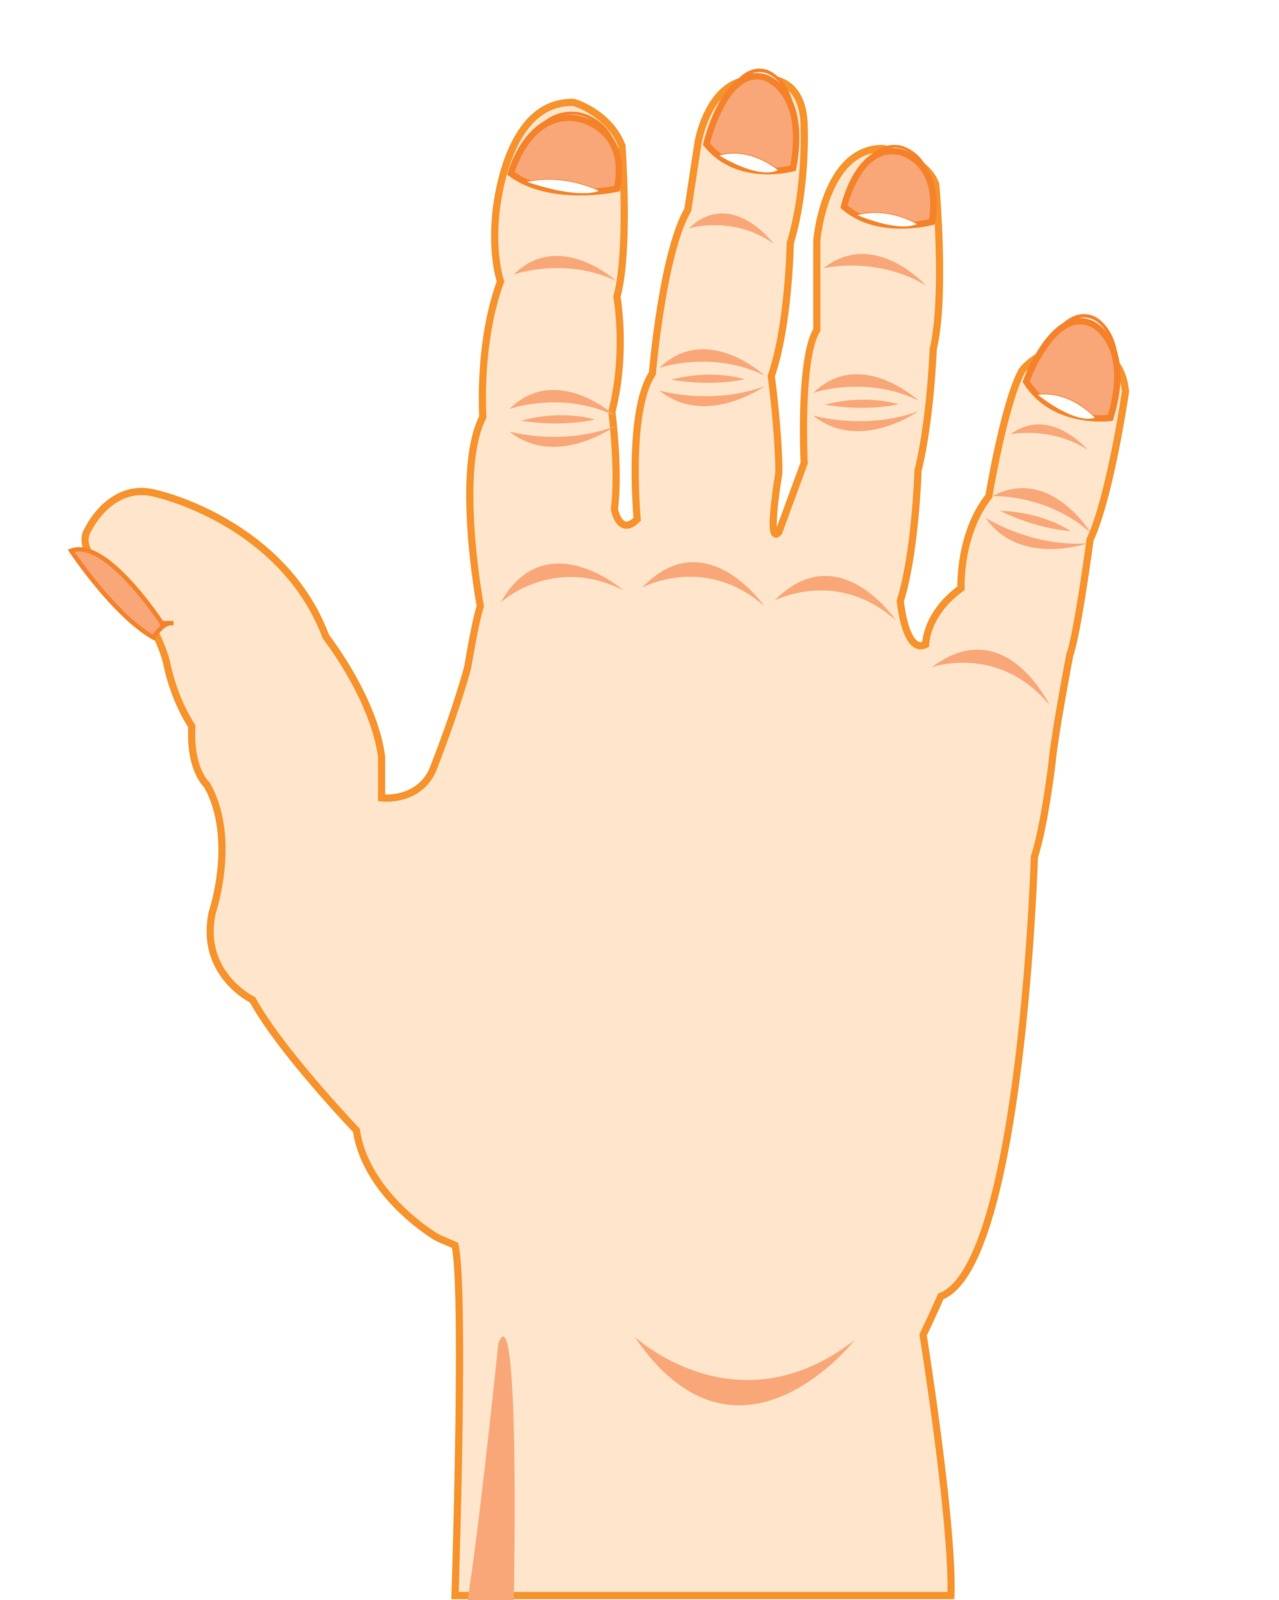 The Hand of the person and finger with nail.Vector illustration